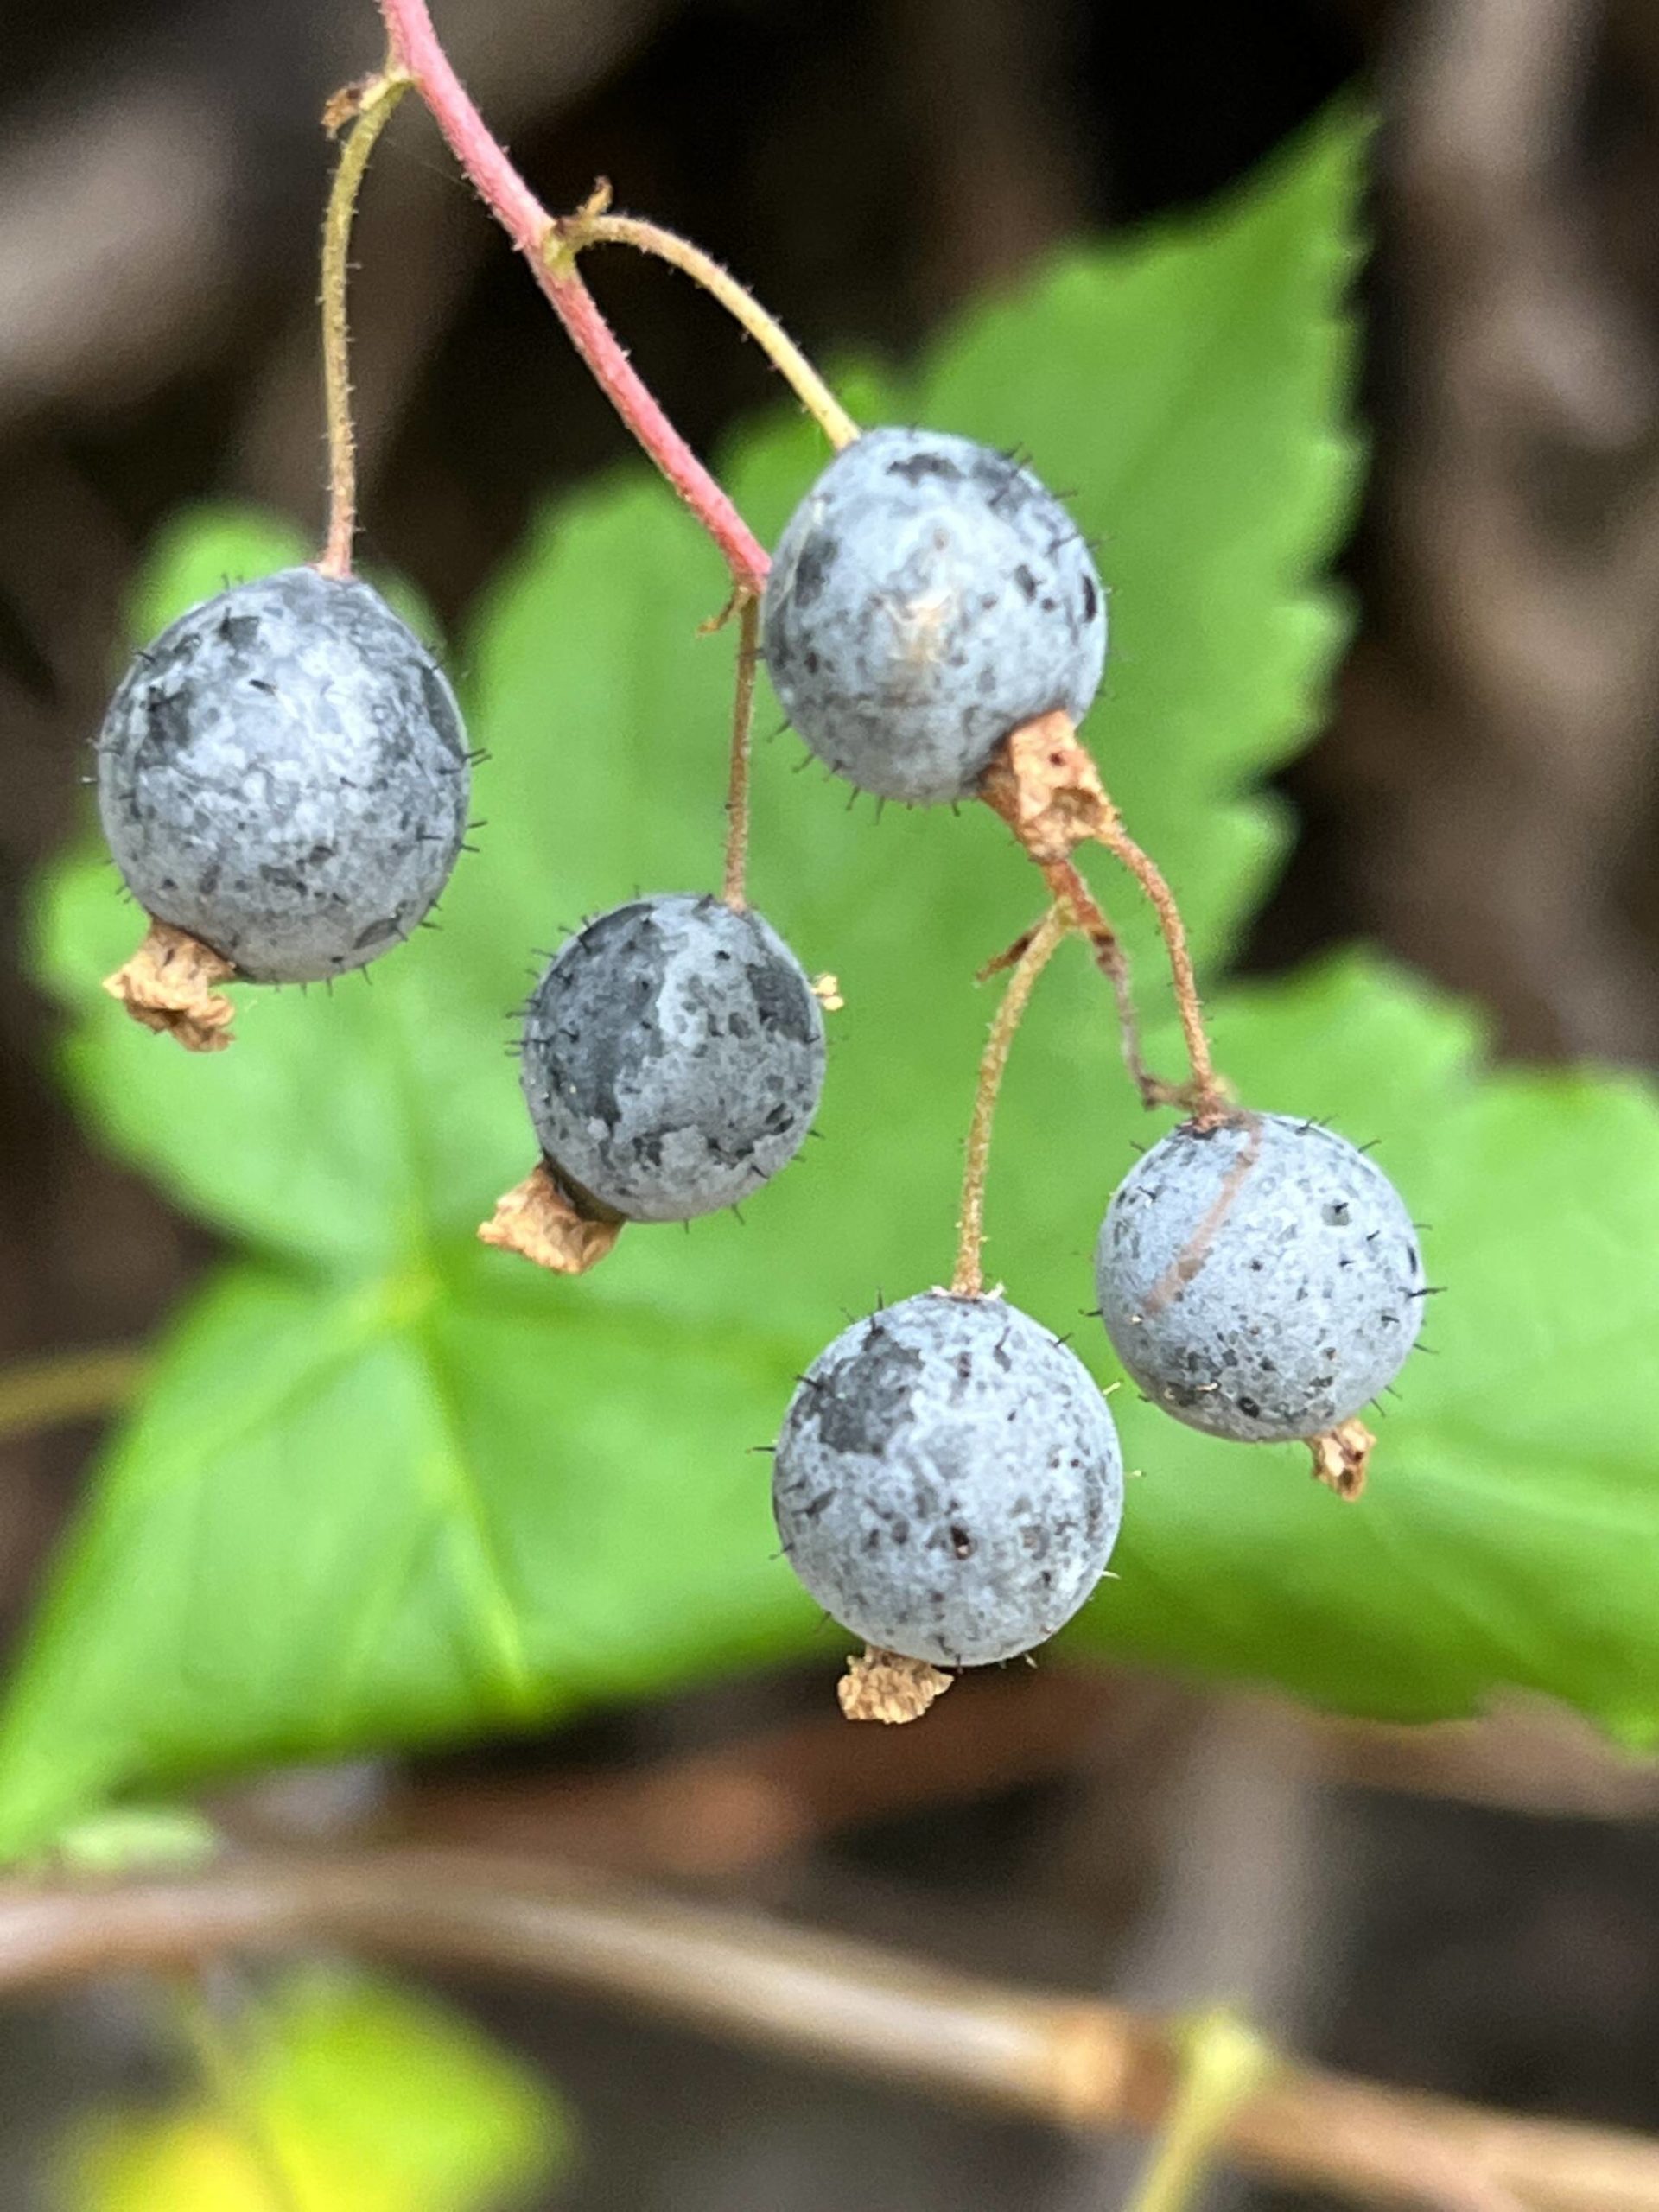 This July 23 photo shows stink currants growing along the Camping Cove Trail. (Courtesy Photo / Deana Barajas)